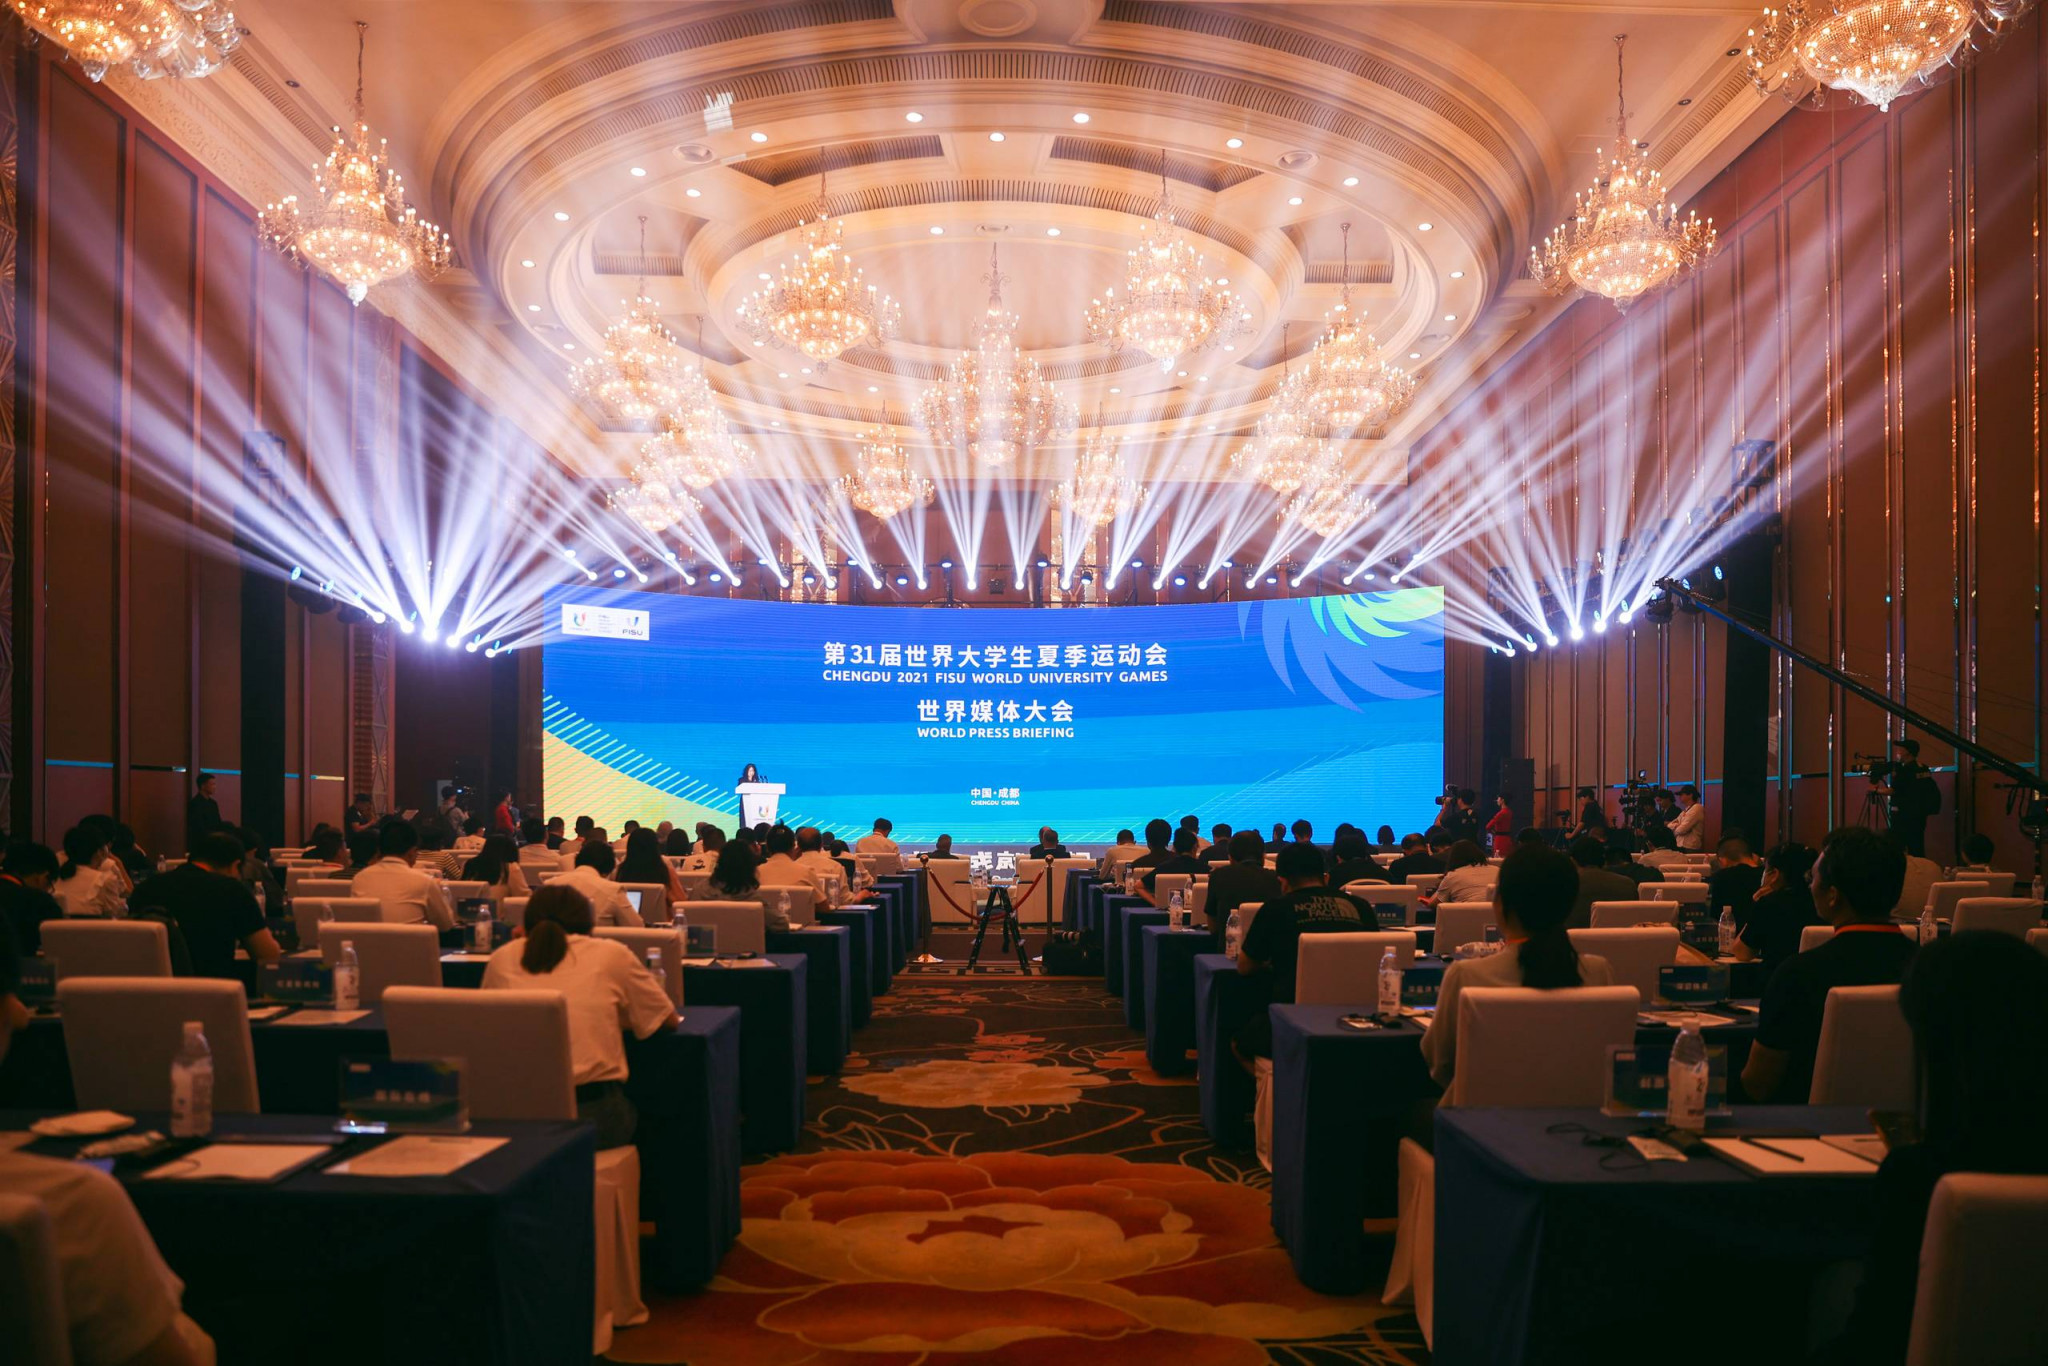 The World Press Briefing for Chengdu 2021 has been held in China ©Chengdu 2021